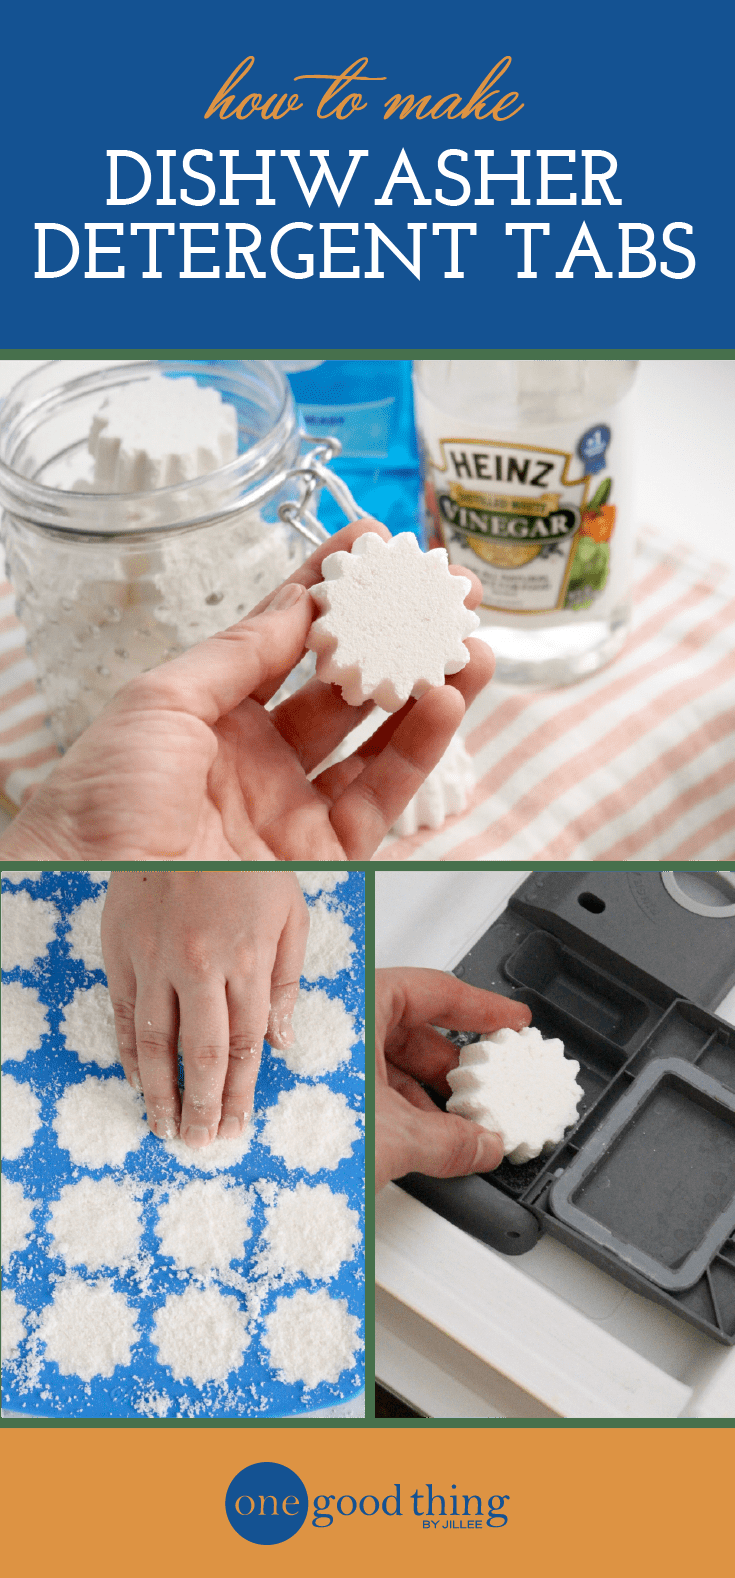 How To Make Your Own Dishwasher Detergent Tabs -   17 diy projects To Make Money baking soda ideas